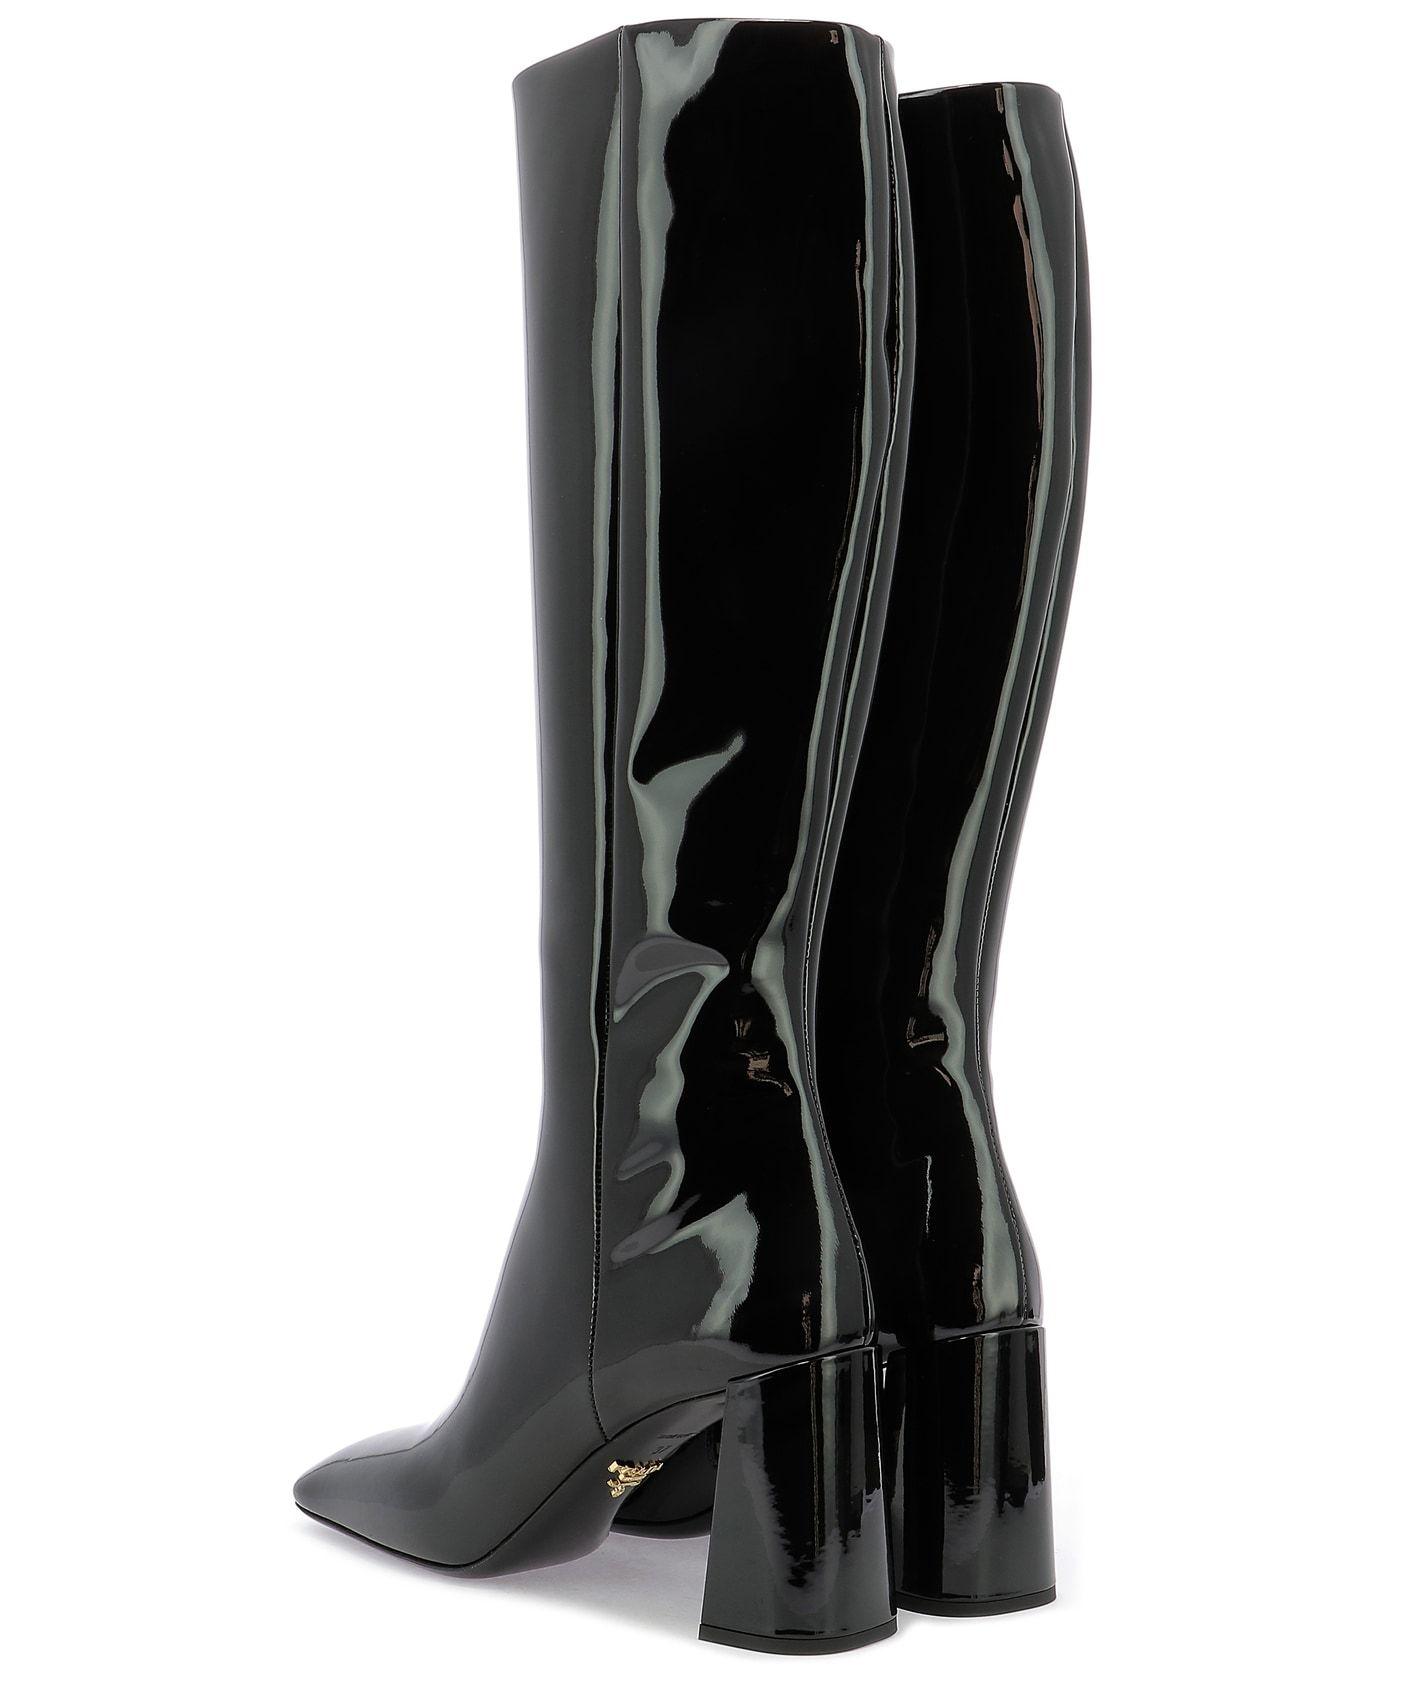 Prada Leather Knee High Boots in Black - Lyst